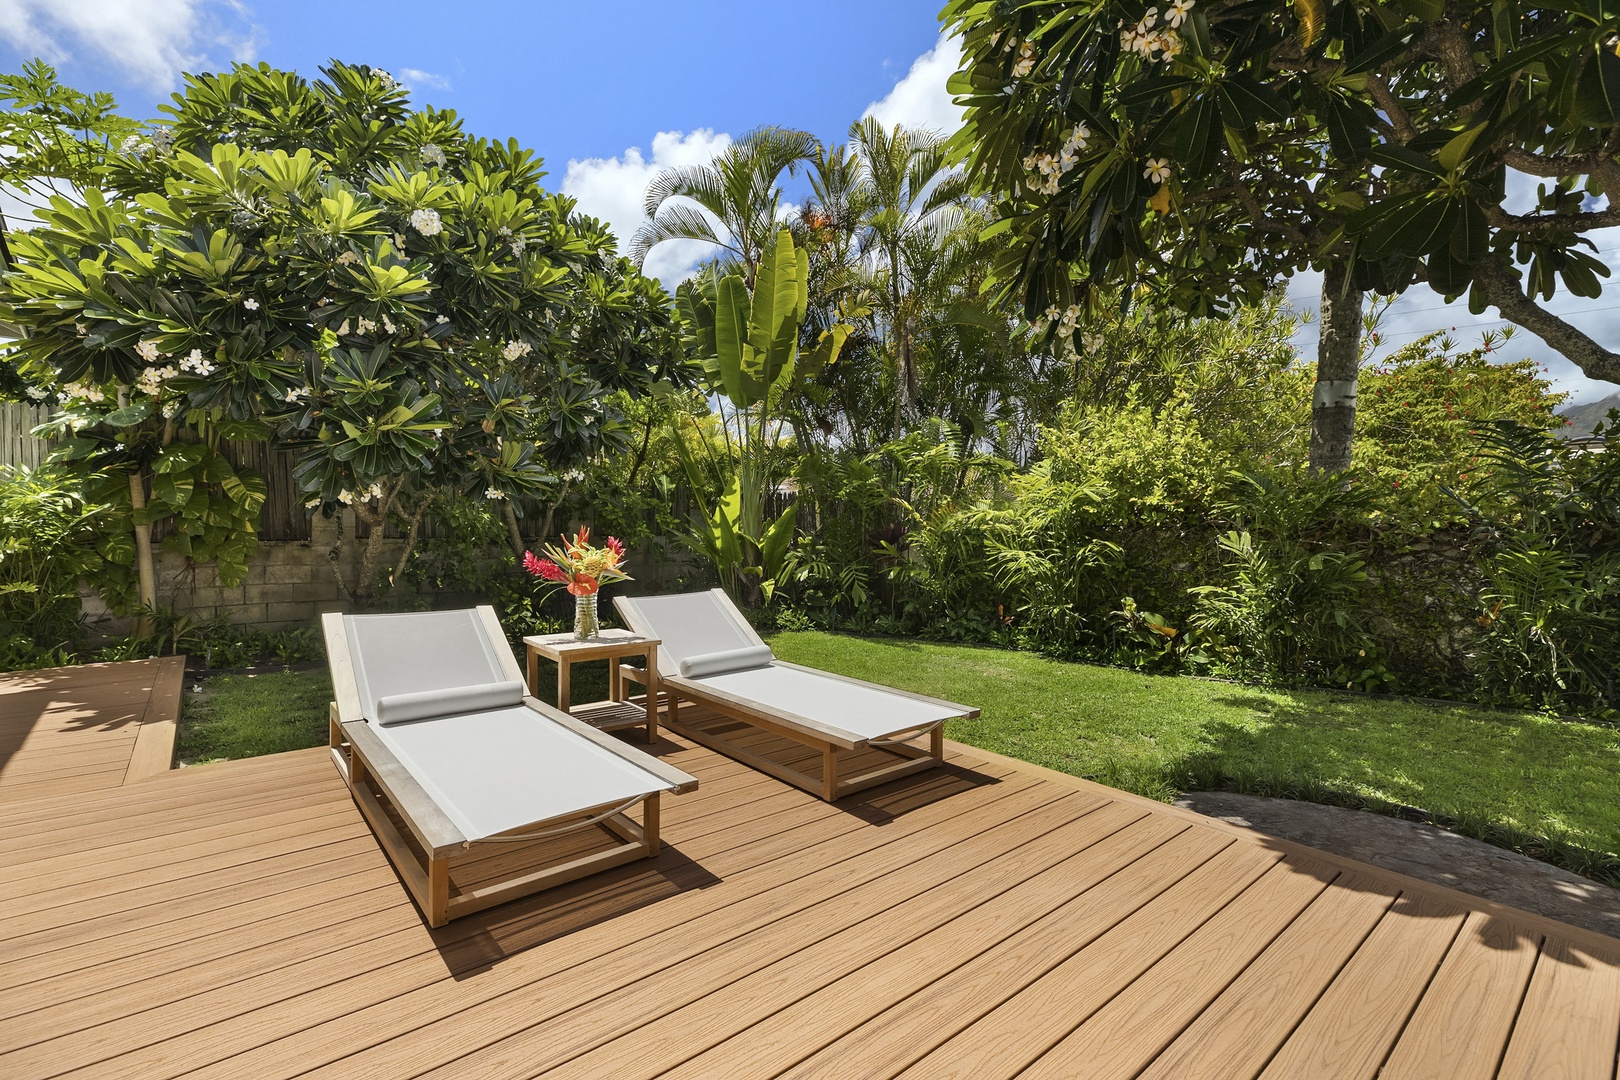 Kailua Vacation Rentals, Ranch Beach House - Private Yard with Large Deck and  Chaise Lounge Chairs